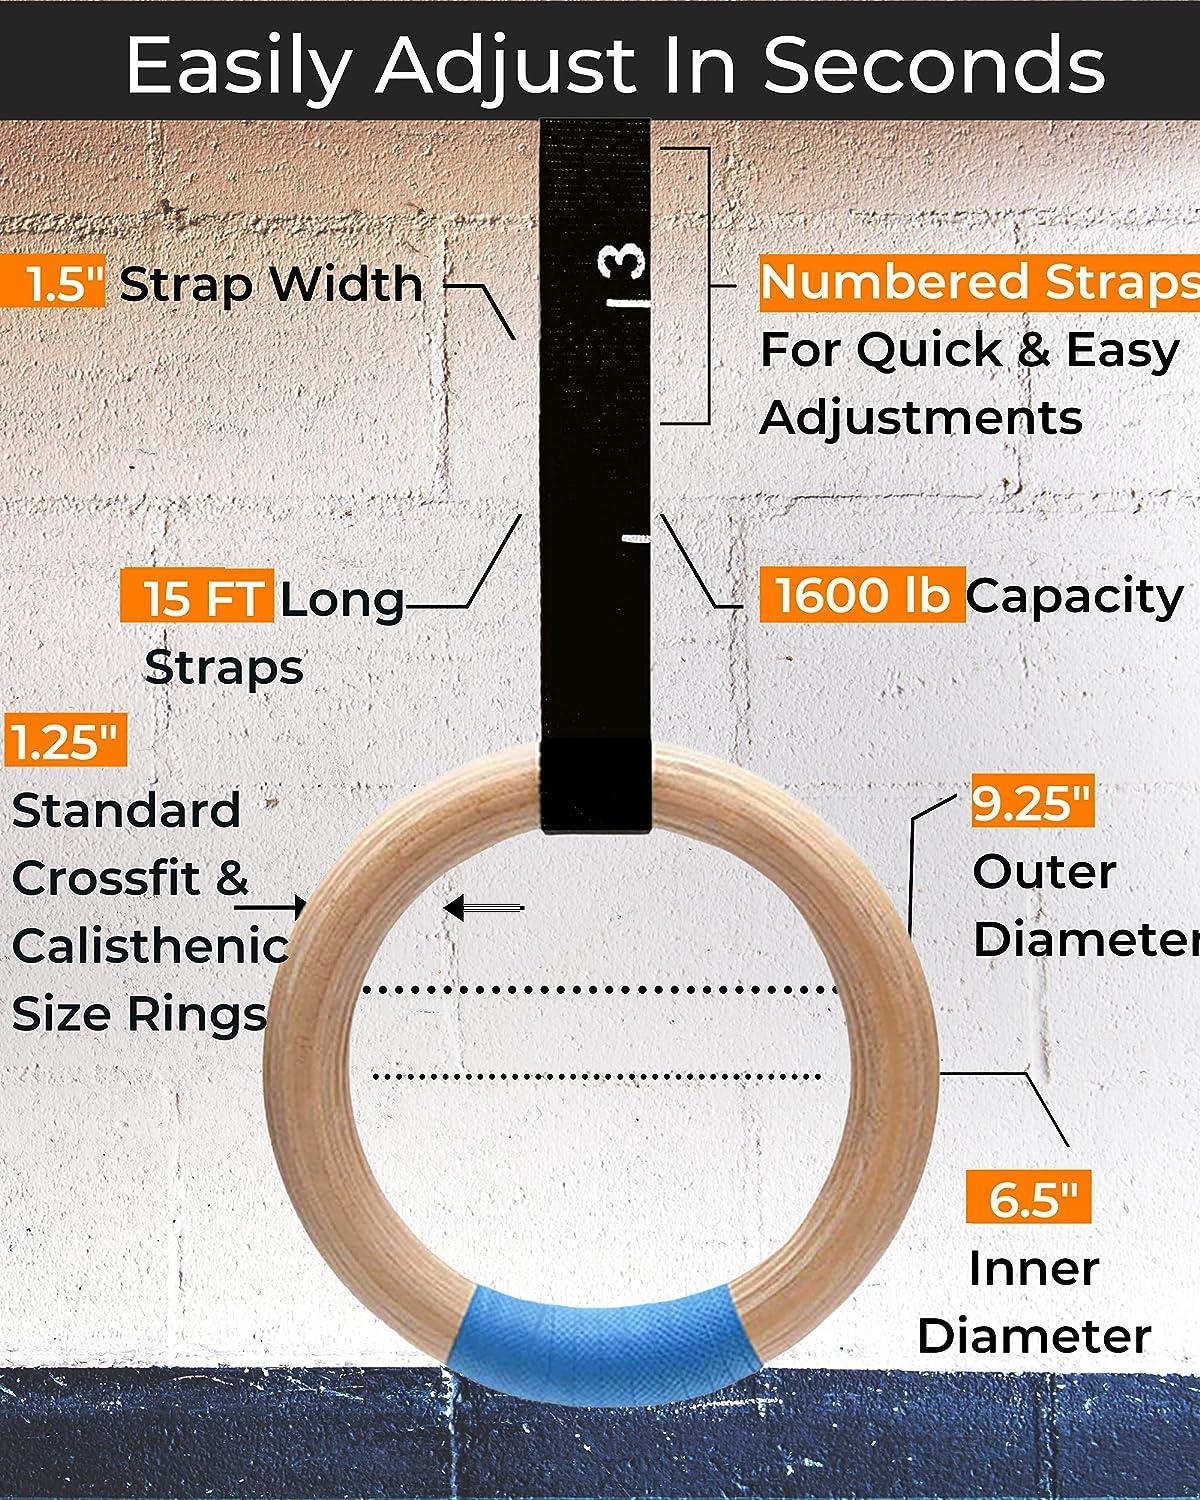 Allergie Perfect Dezelfde Wooden Gymnastic Rings with Adjustable Straps - 1.25 Non-Slip Olympic Rings  1600lbs - 15ft Long Numbered Straps - Quick Install Cam Buckle - For Pull  Ups Cross-Training and Home Gym Full Body Workout